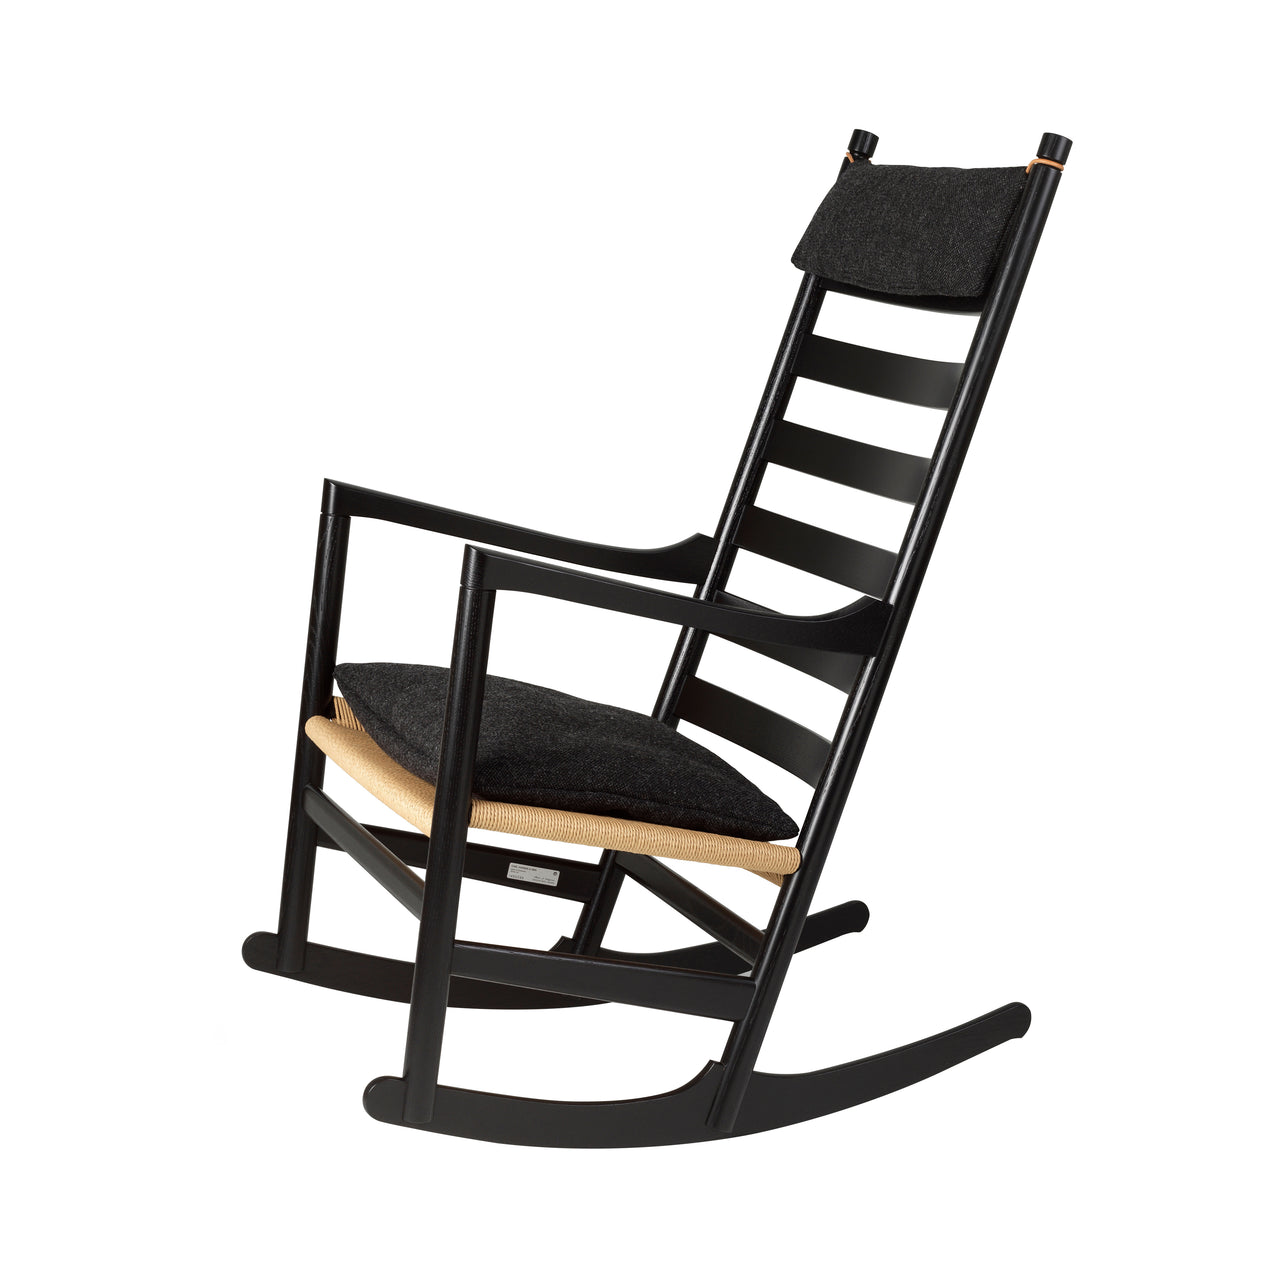 CH45 Rocking Chair with Cushion: Natural Paper Cord + Black Oak